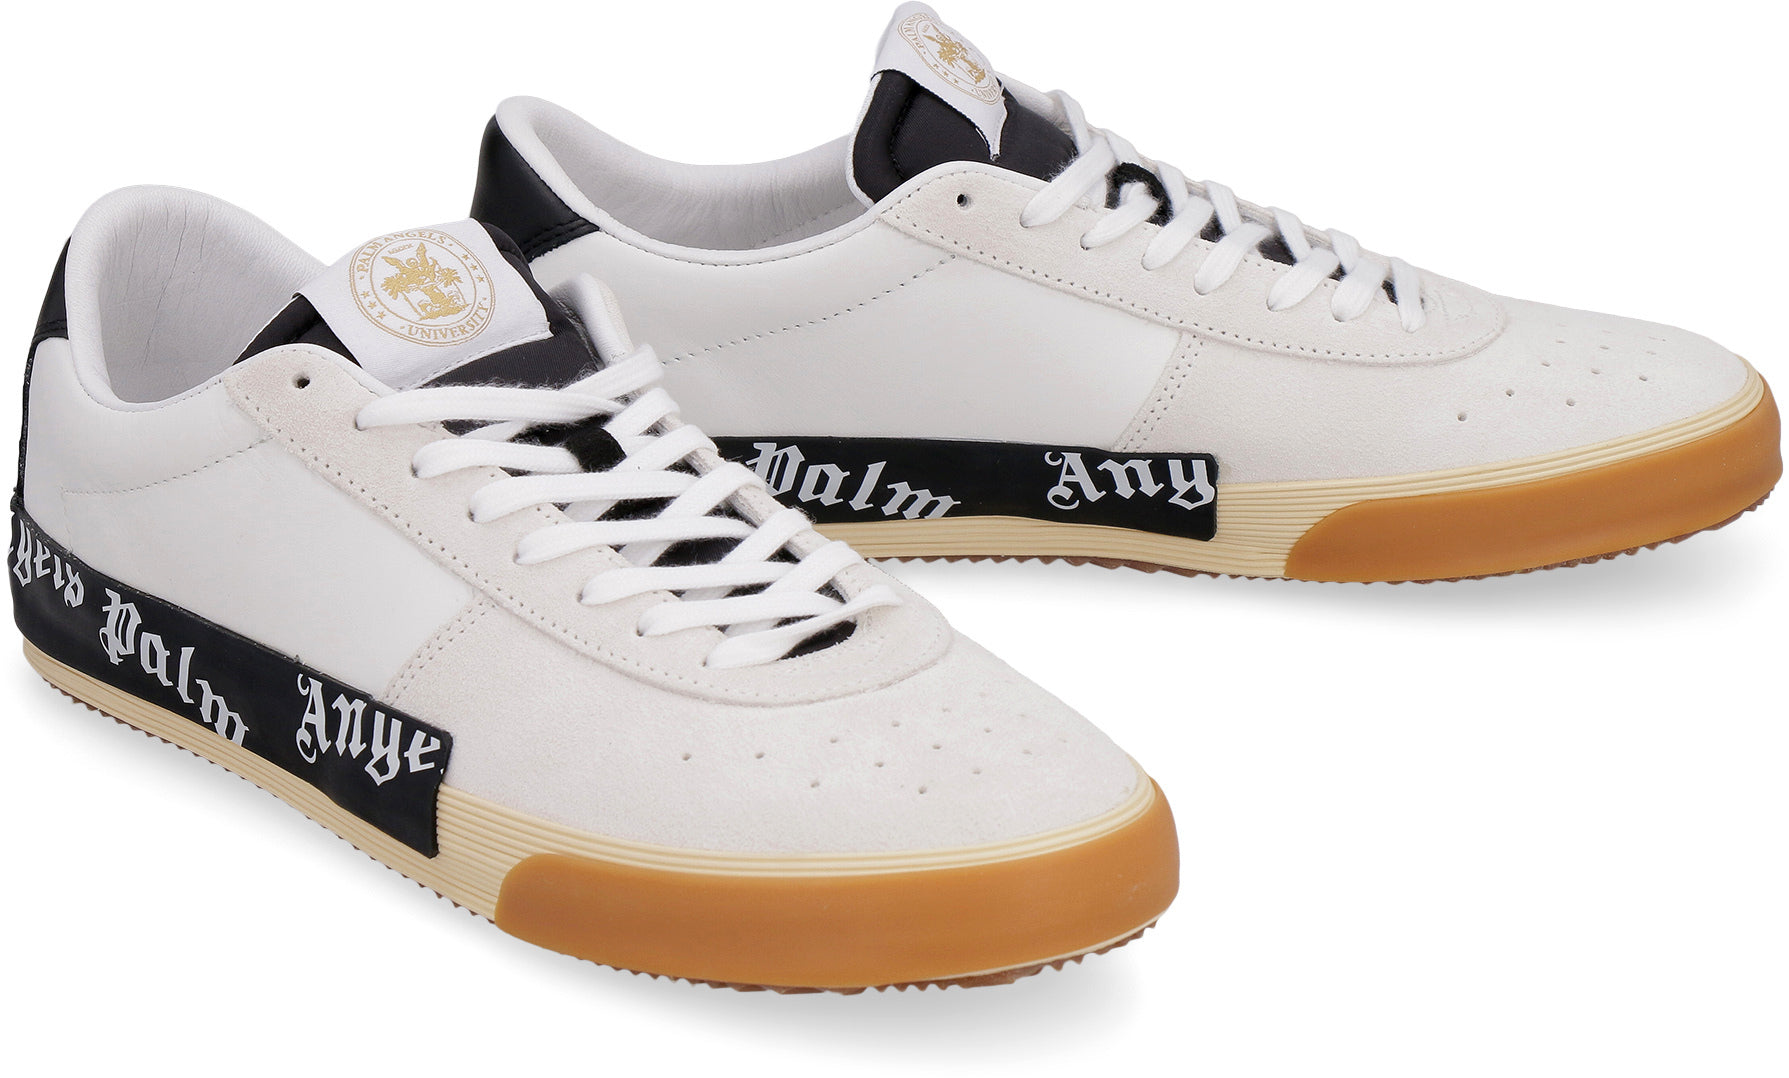 New Vulcanized low-top sneakers